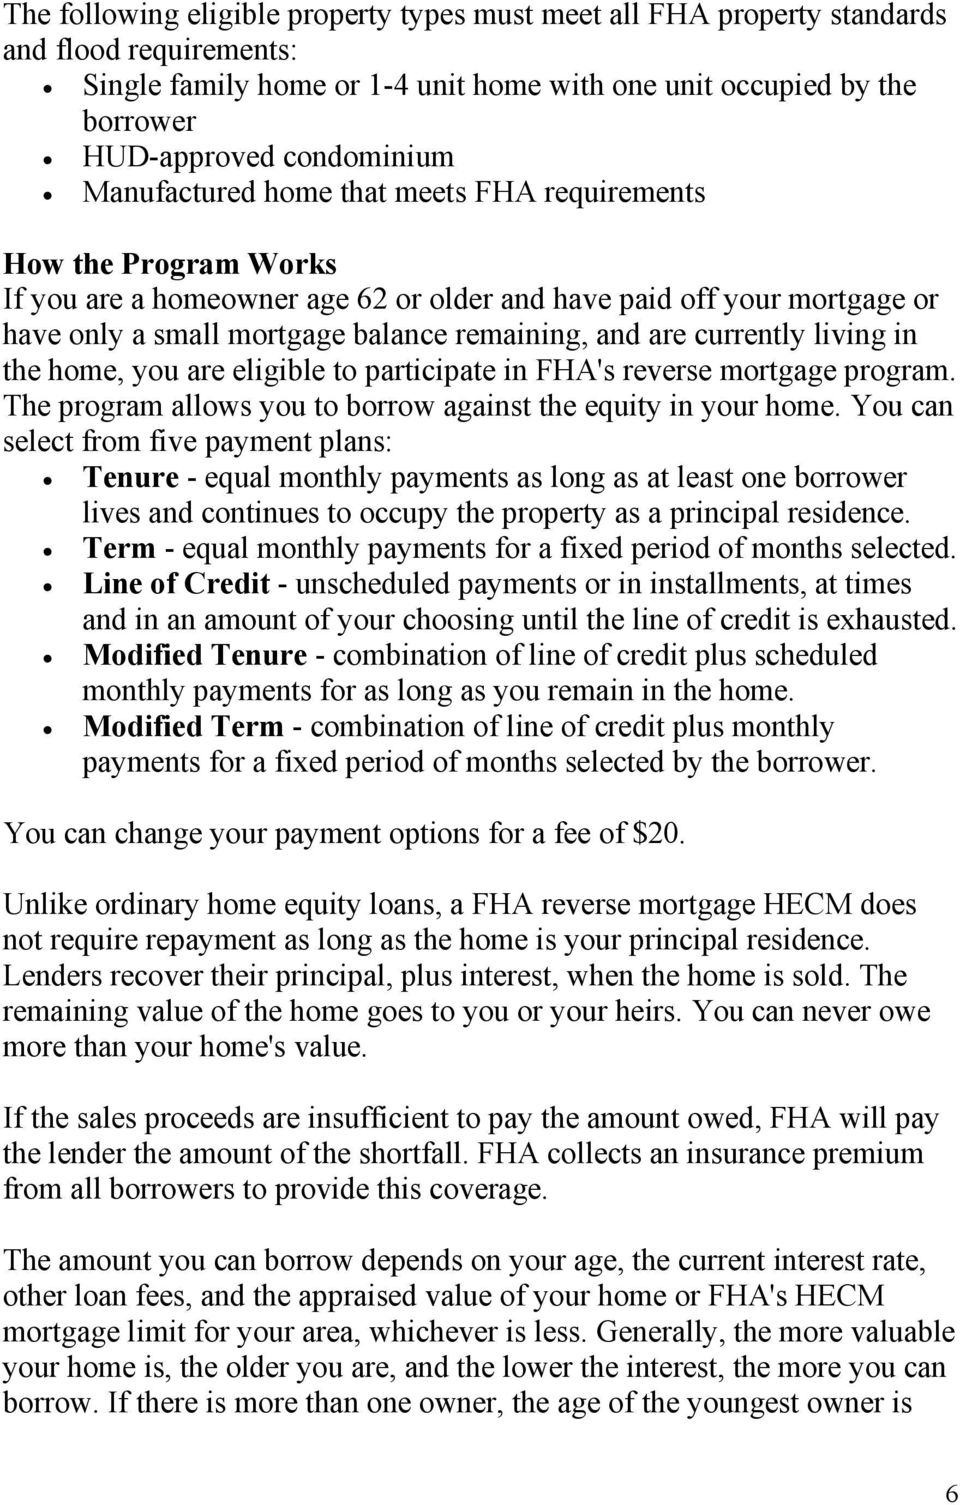 currently living in the home, you are eligible to participate in FHA's reverse mortgage program. The program allows you to borrow against the equity in your home.